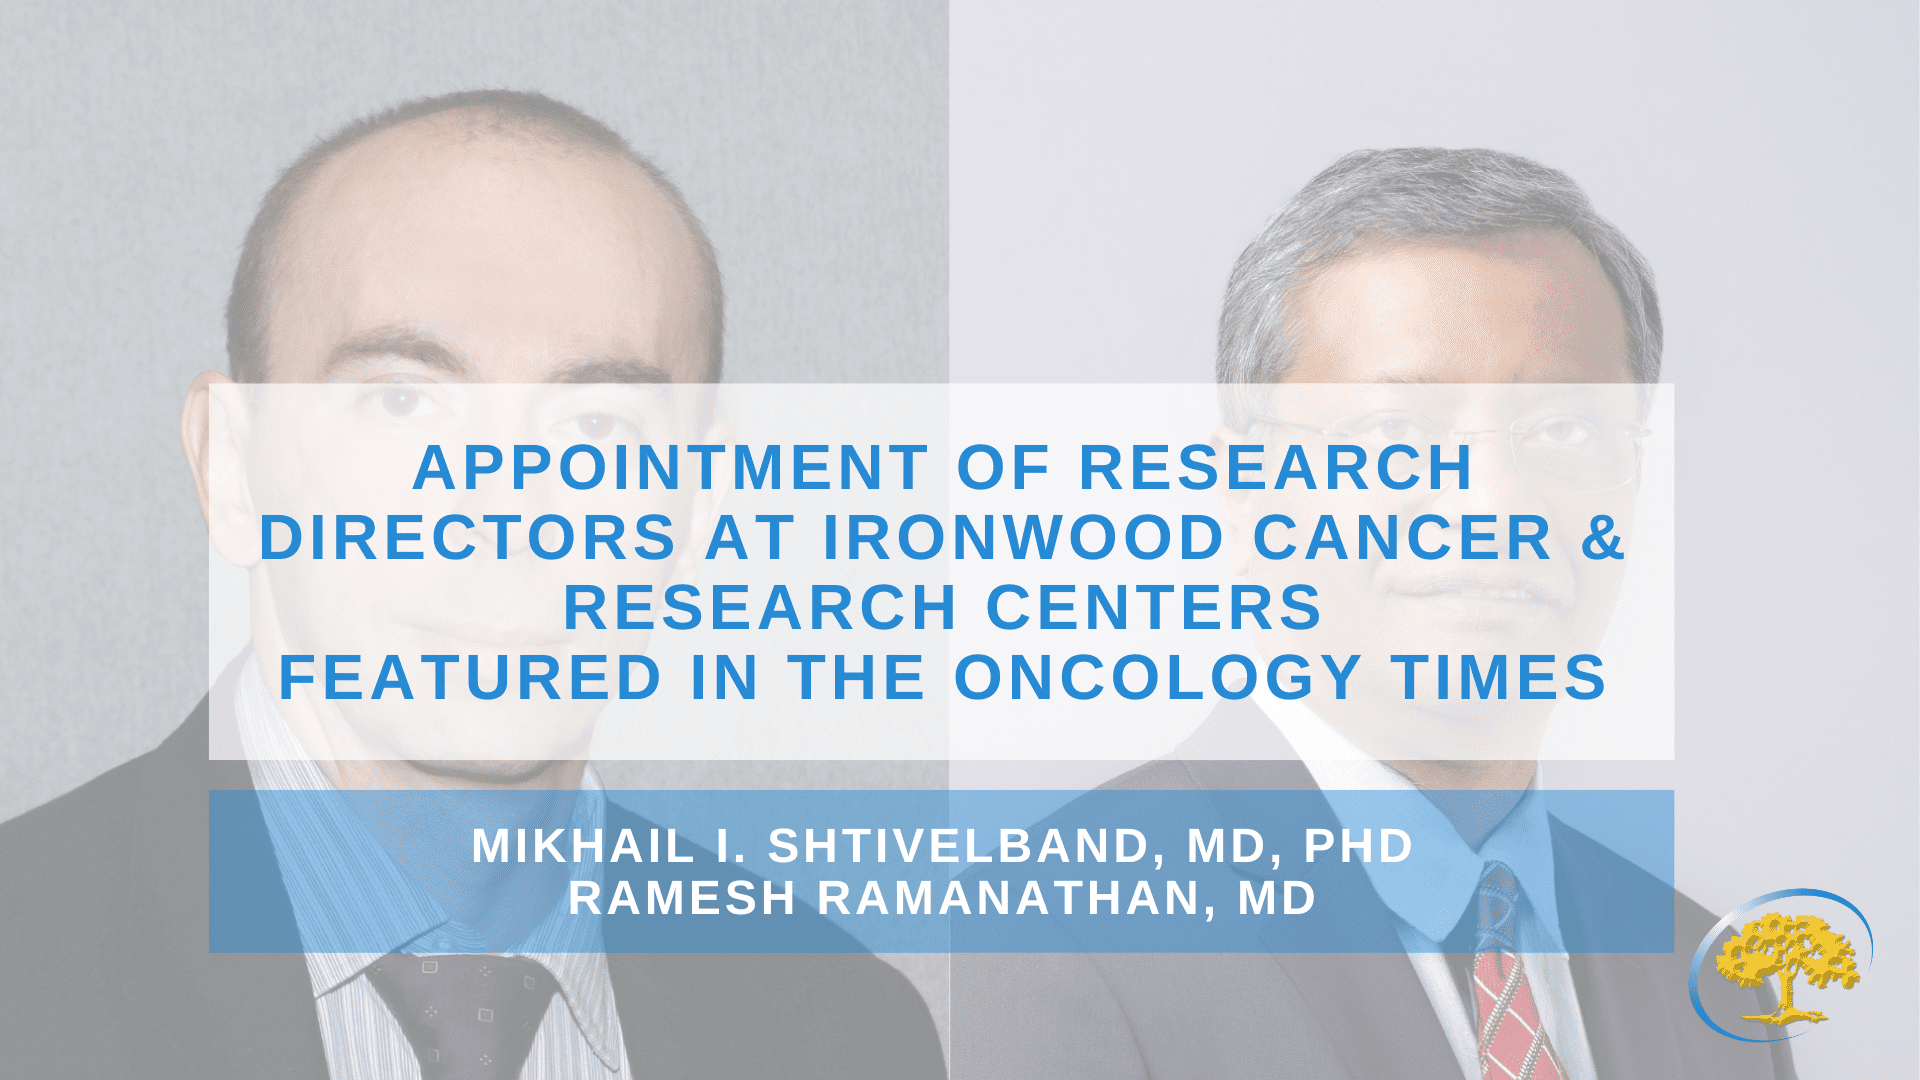 Appointment of Research Directors at Ironwood Cancer & Research Centers featured in the oncology times